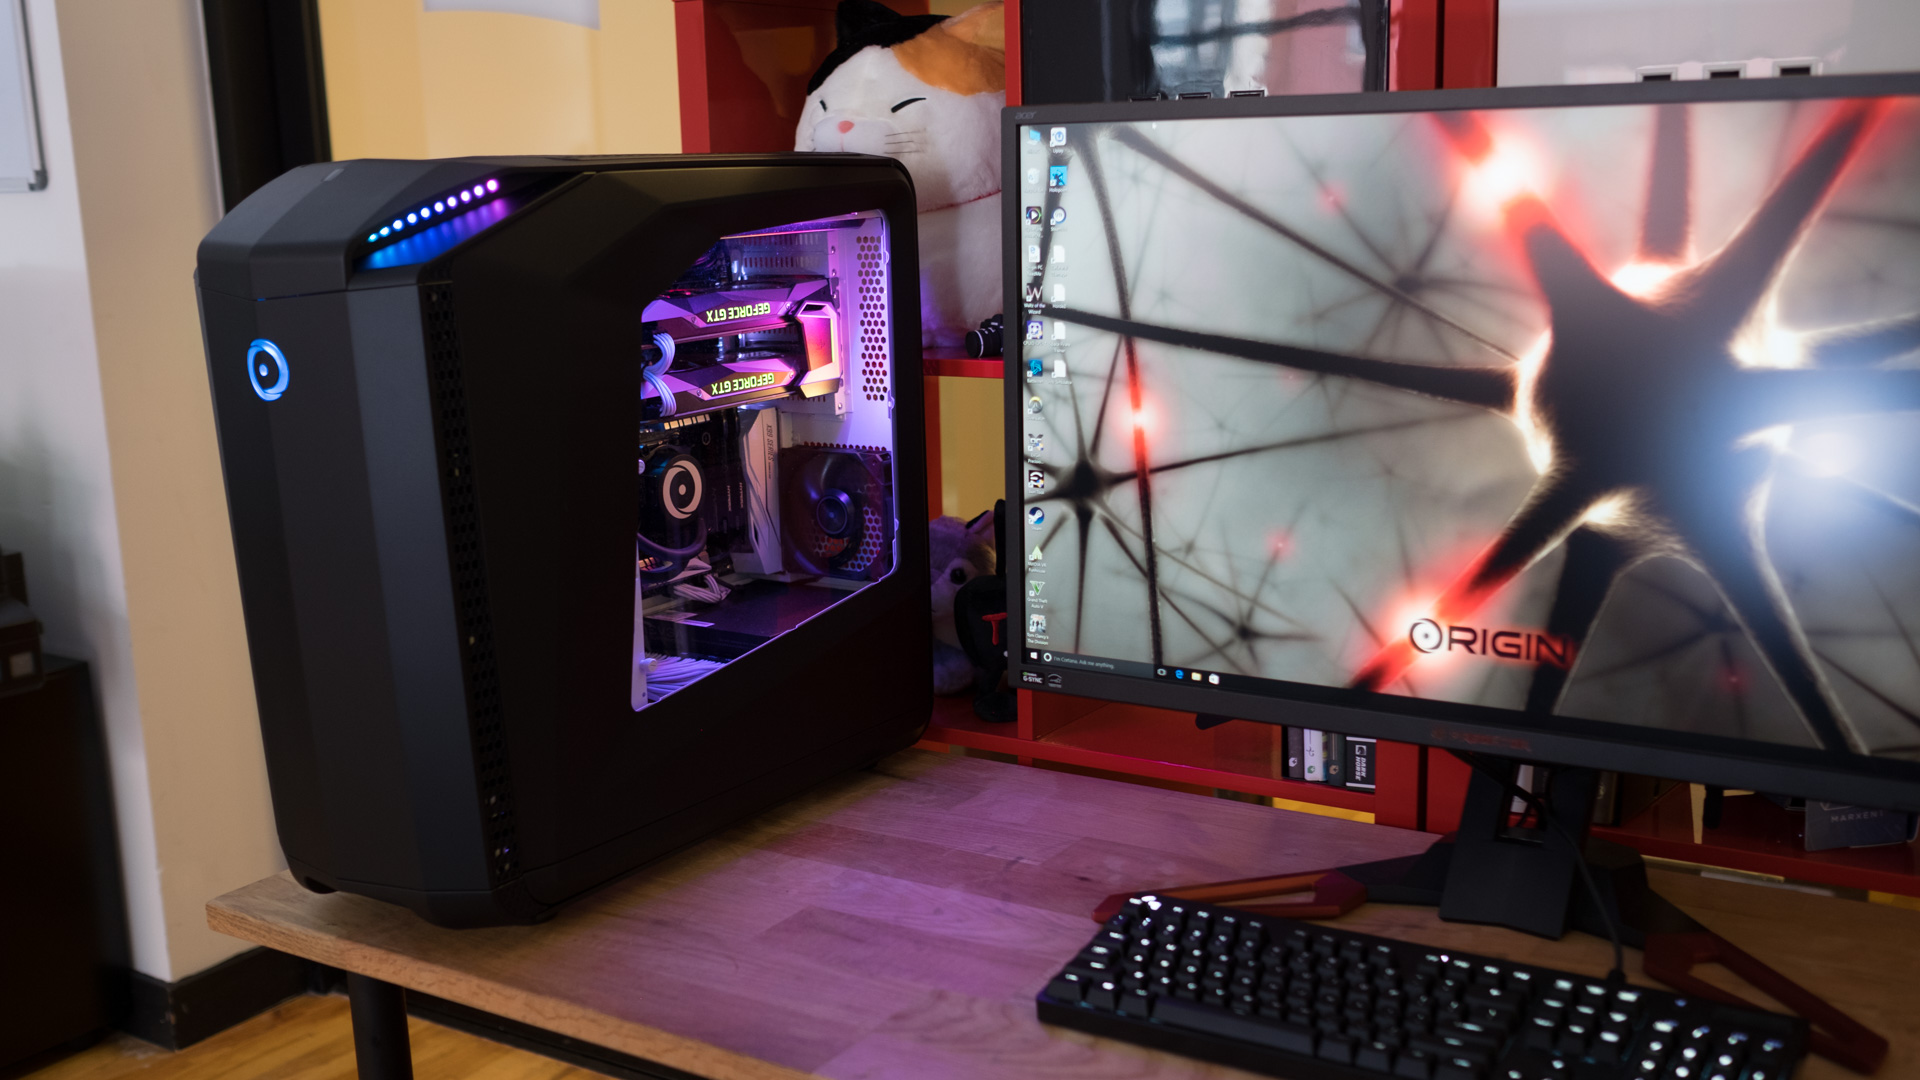 The best gaming PC 2017: 10 of the top gaming desktops you can buy